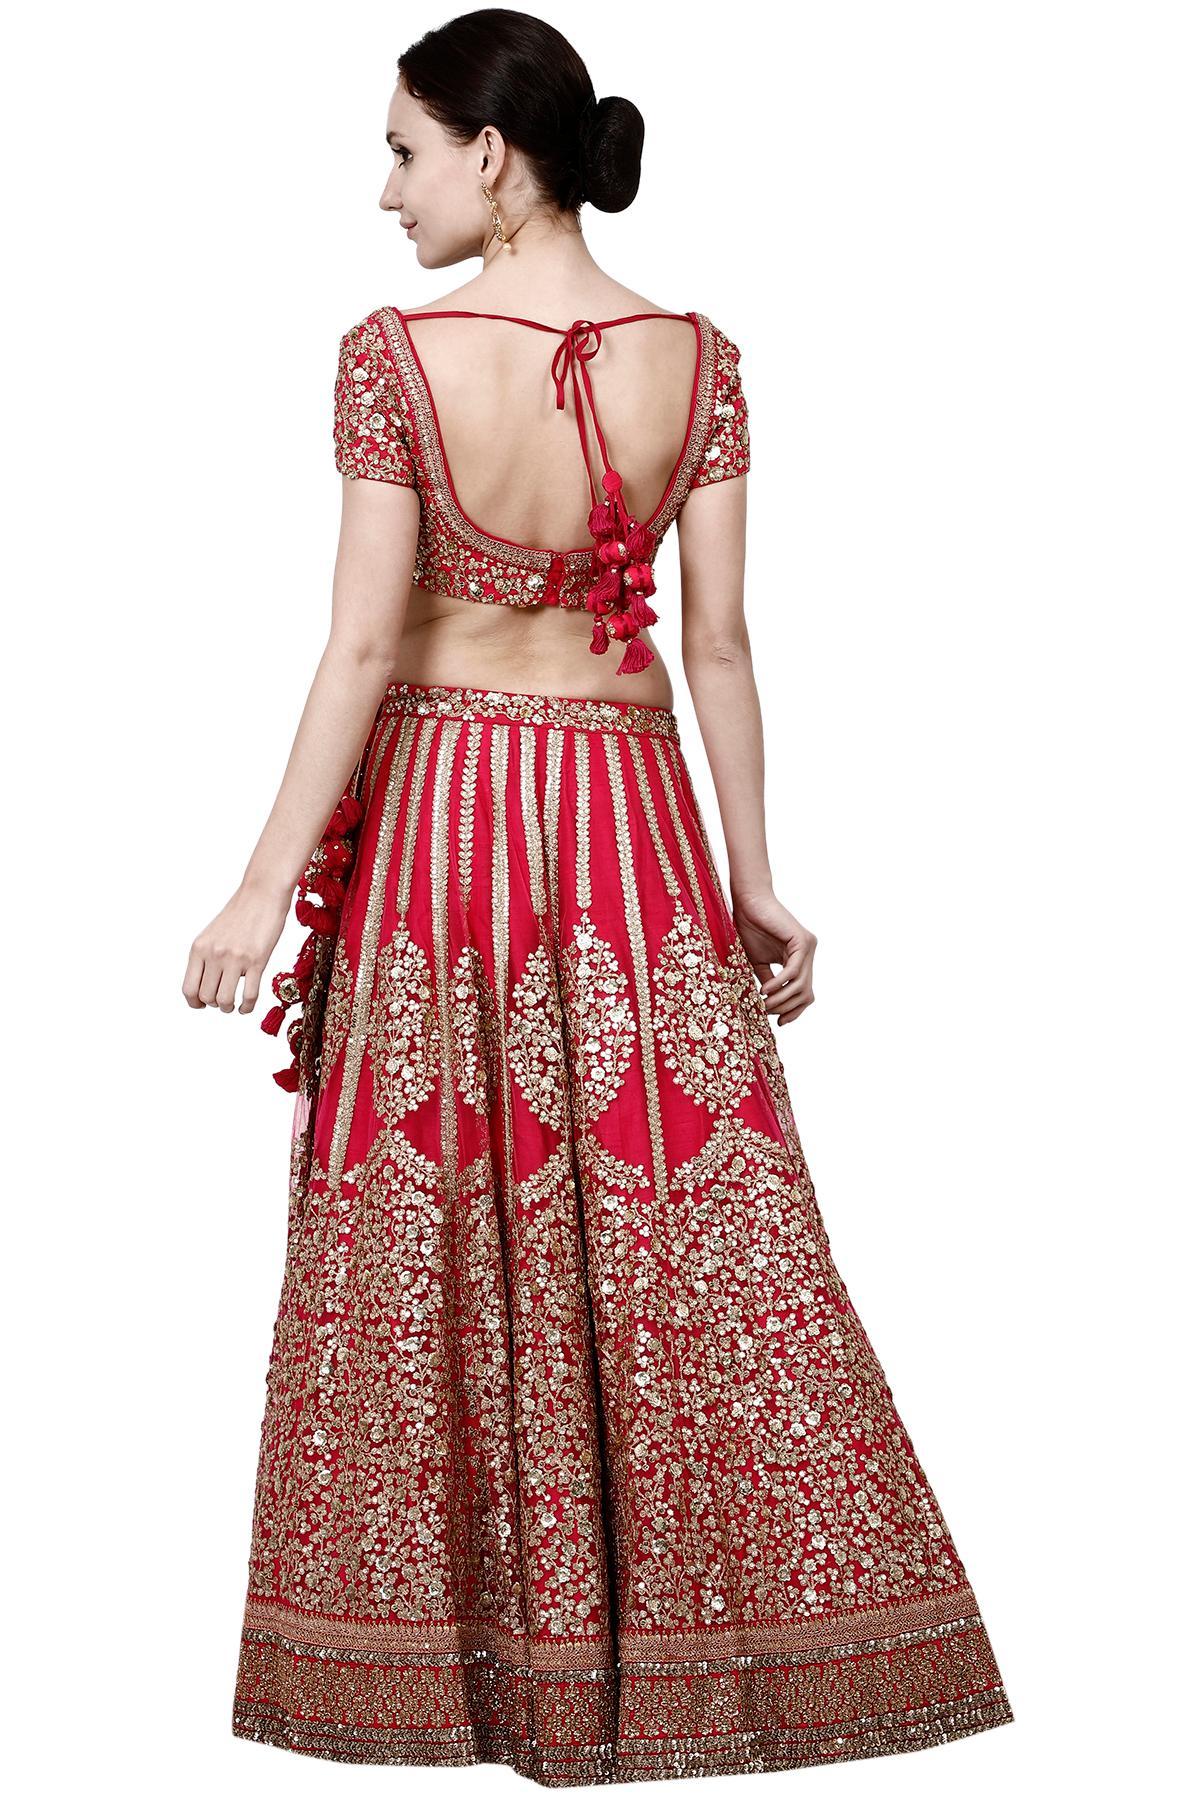 Why you should rent your wedding lehenga and not buy it? - Mallufarms